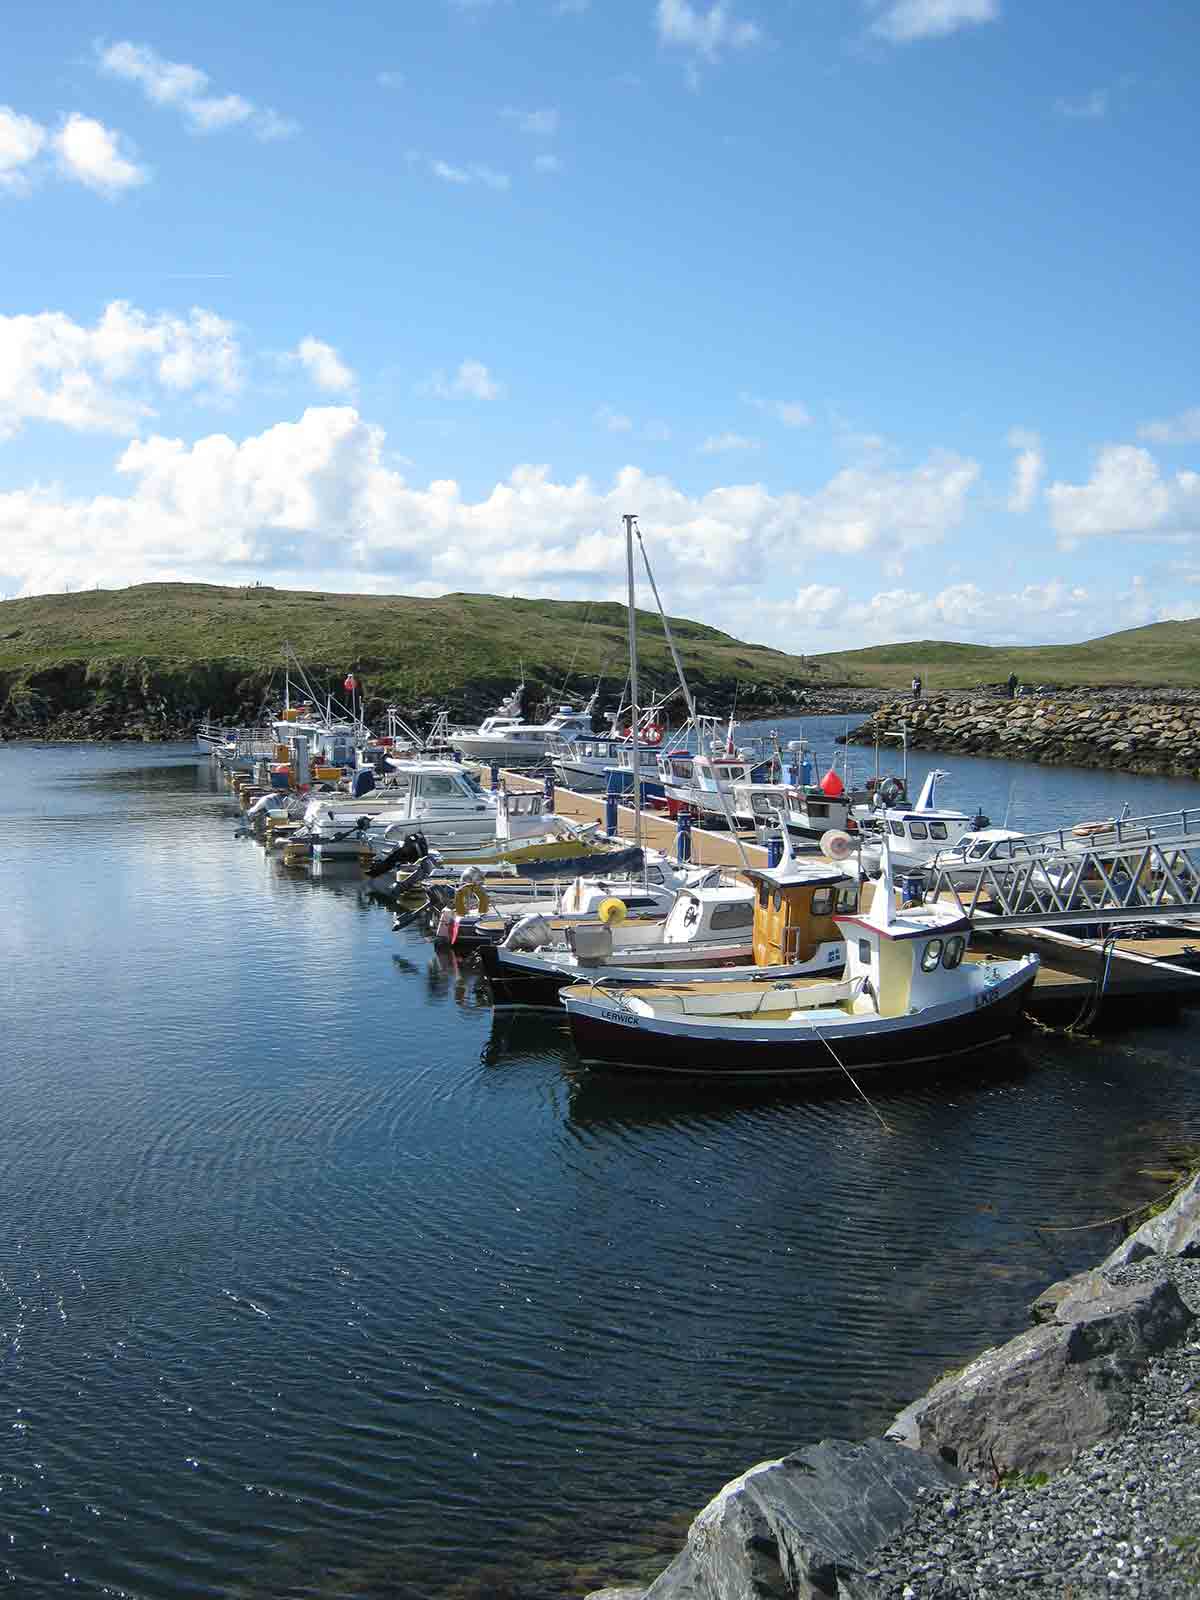 Yachts docked in Shetland Islands, UK over a sunny a day